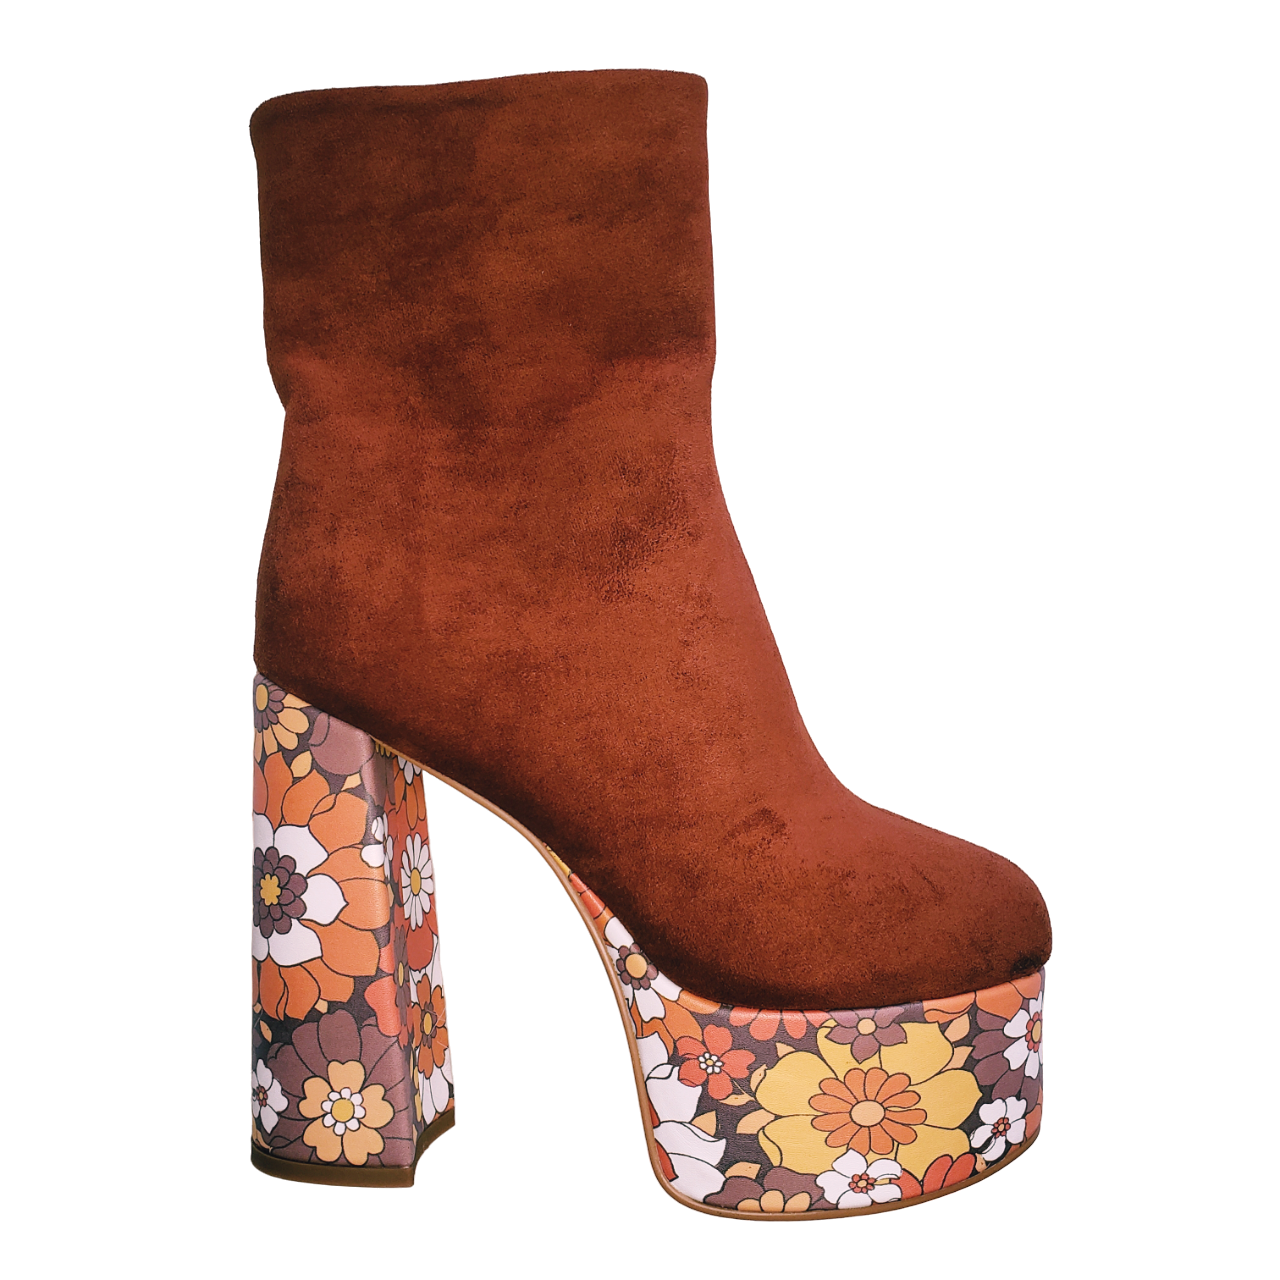 V.I.P Early Access Suede Floral Platform Boots